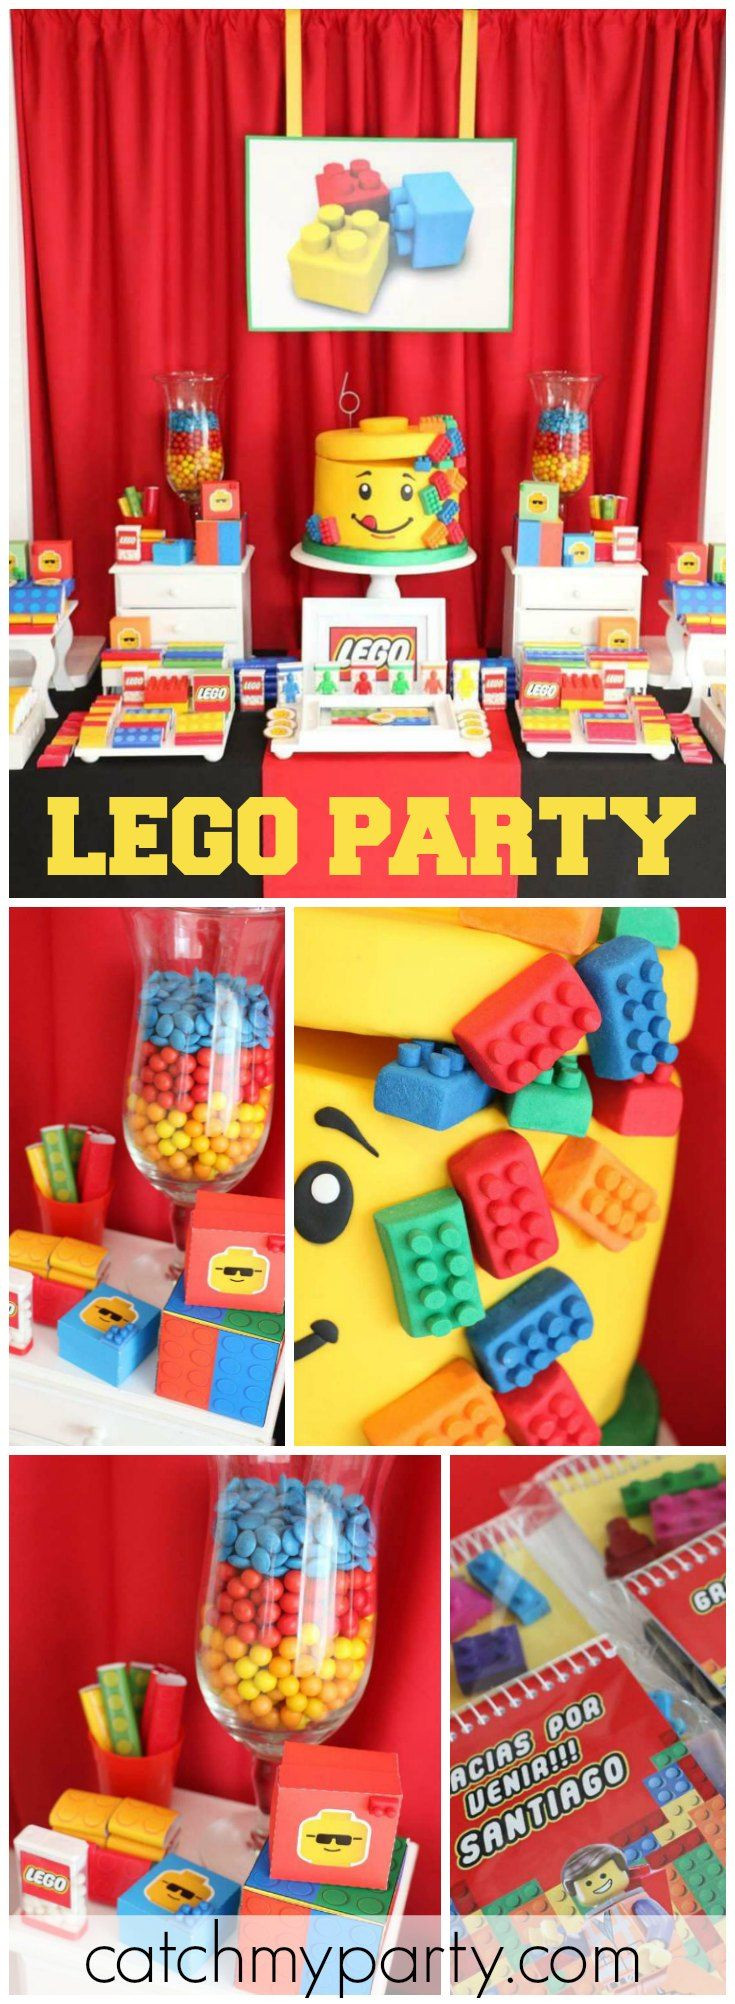 Four Year Old Birthday Party Ideas
 362 best Lego Party Ideas images on Pinterest